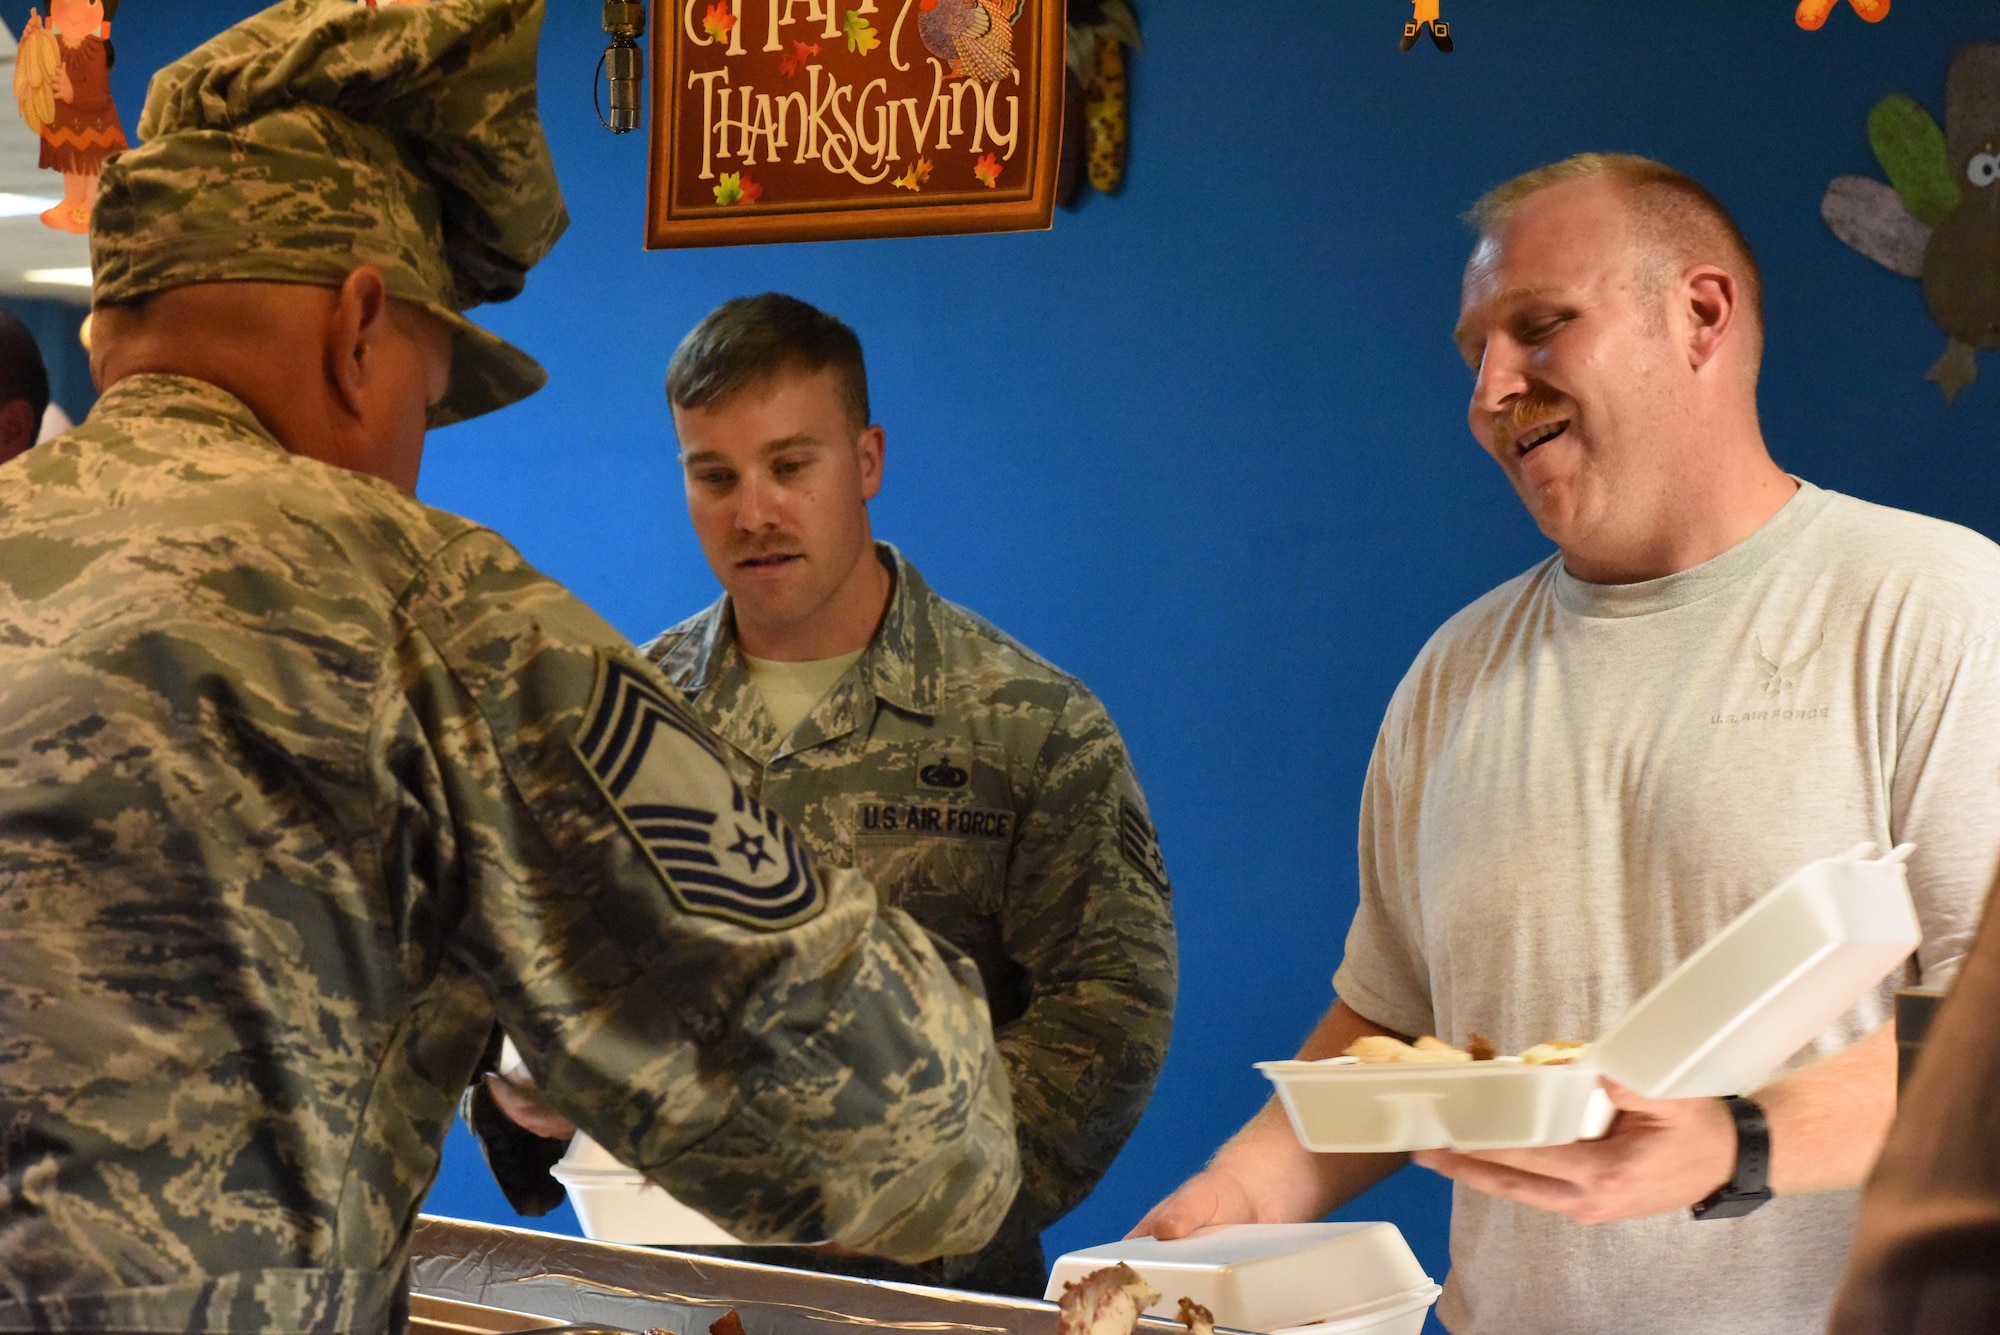 Senior leaders with the 379th Air Expeditionary Wing team up with the 379th Expeditionary Force Support Squadron dining facility team to serve Thanksgiving lunch and dinner at Al Udeid Air Base, Qatar, Nov. 24, 2016. In celebration of the holiday, the dining facility prepared a special feast for lunch and dinner that included many traditional Thanksgiving dishes. (U.S. Air Force photo by Senior Airman Cynthia A. Innocenti)